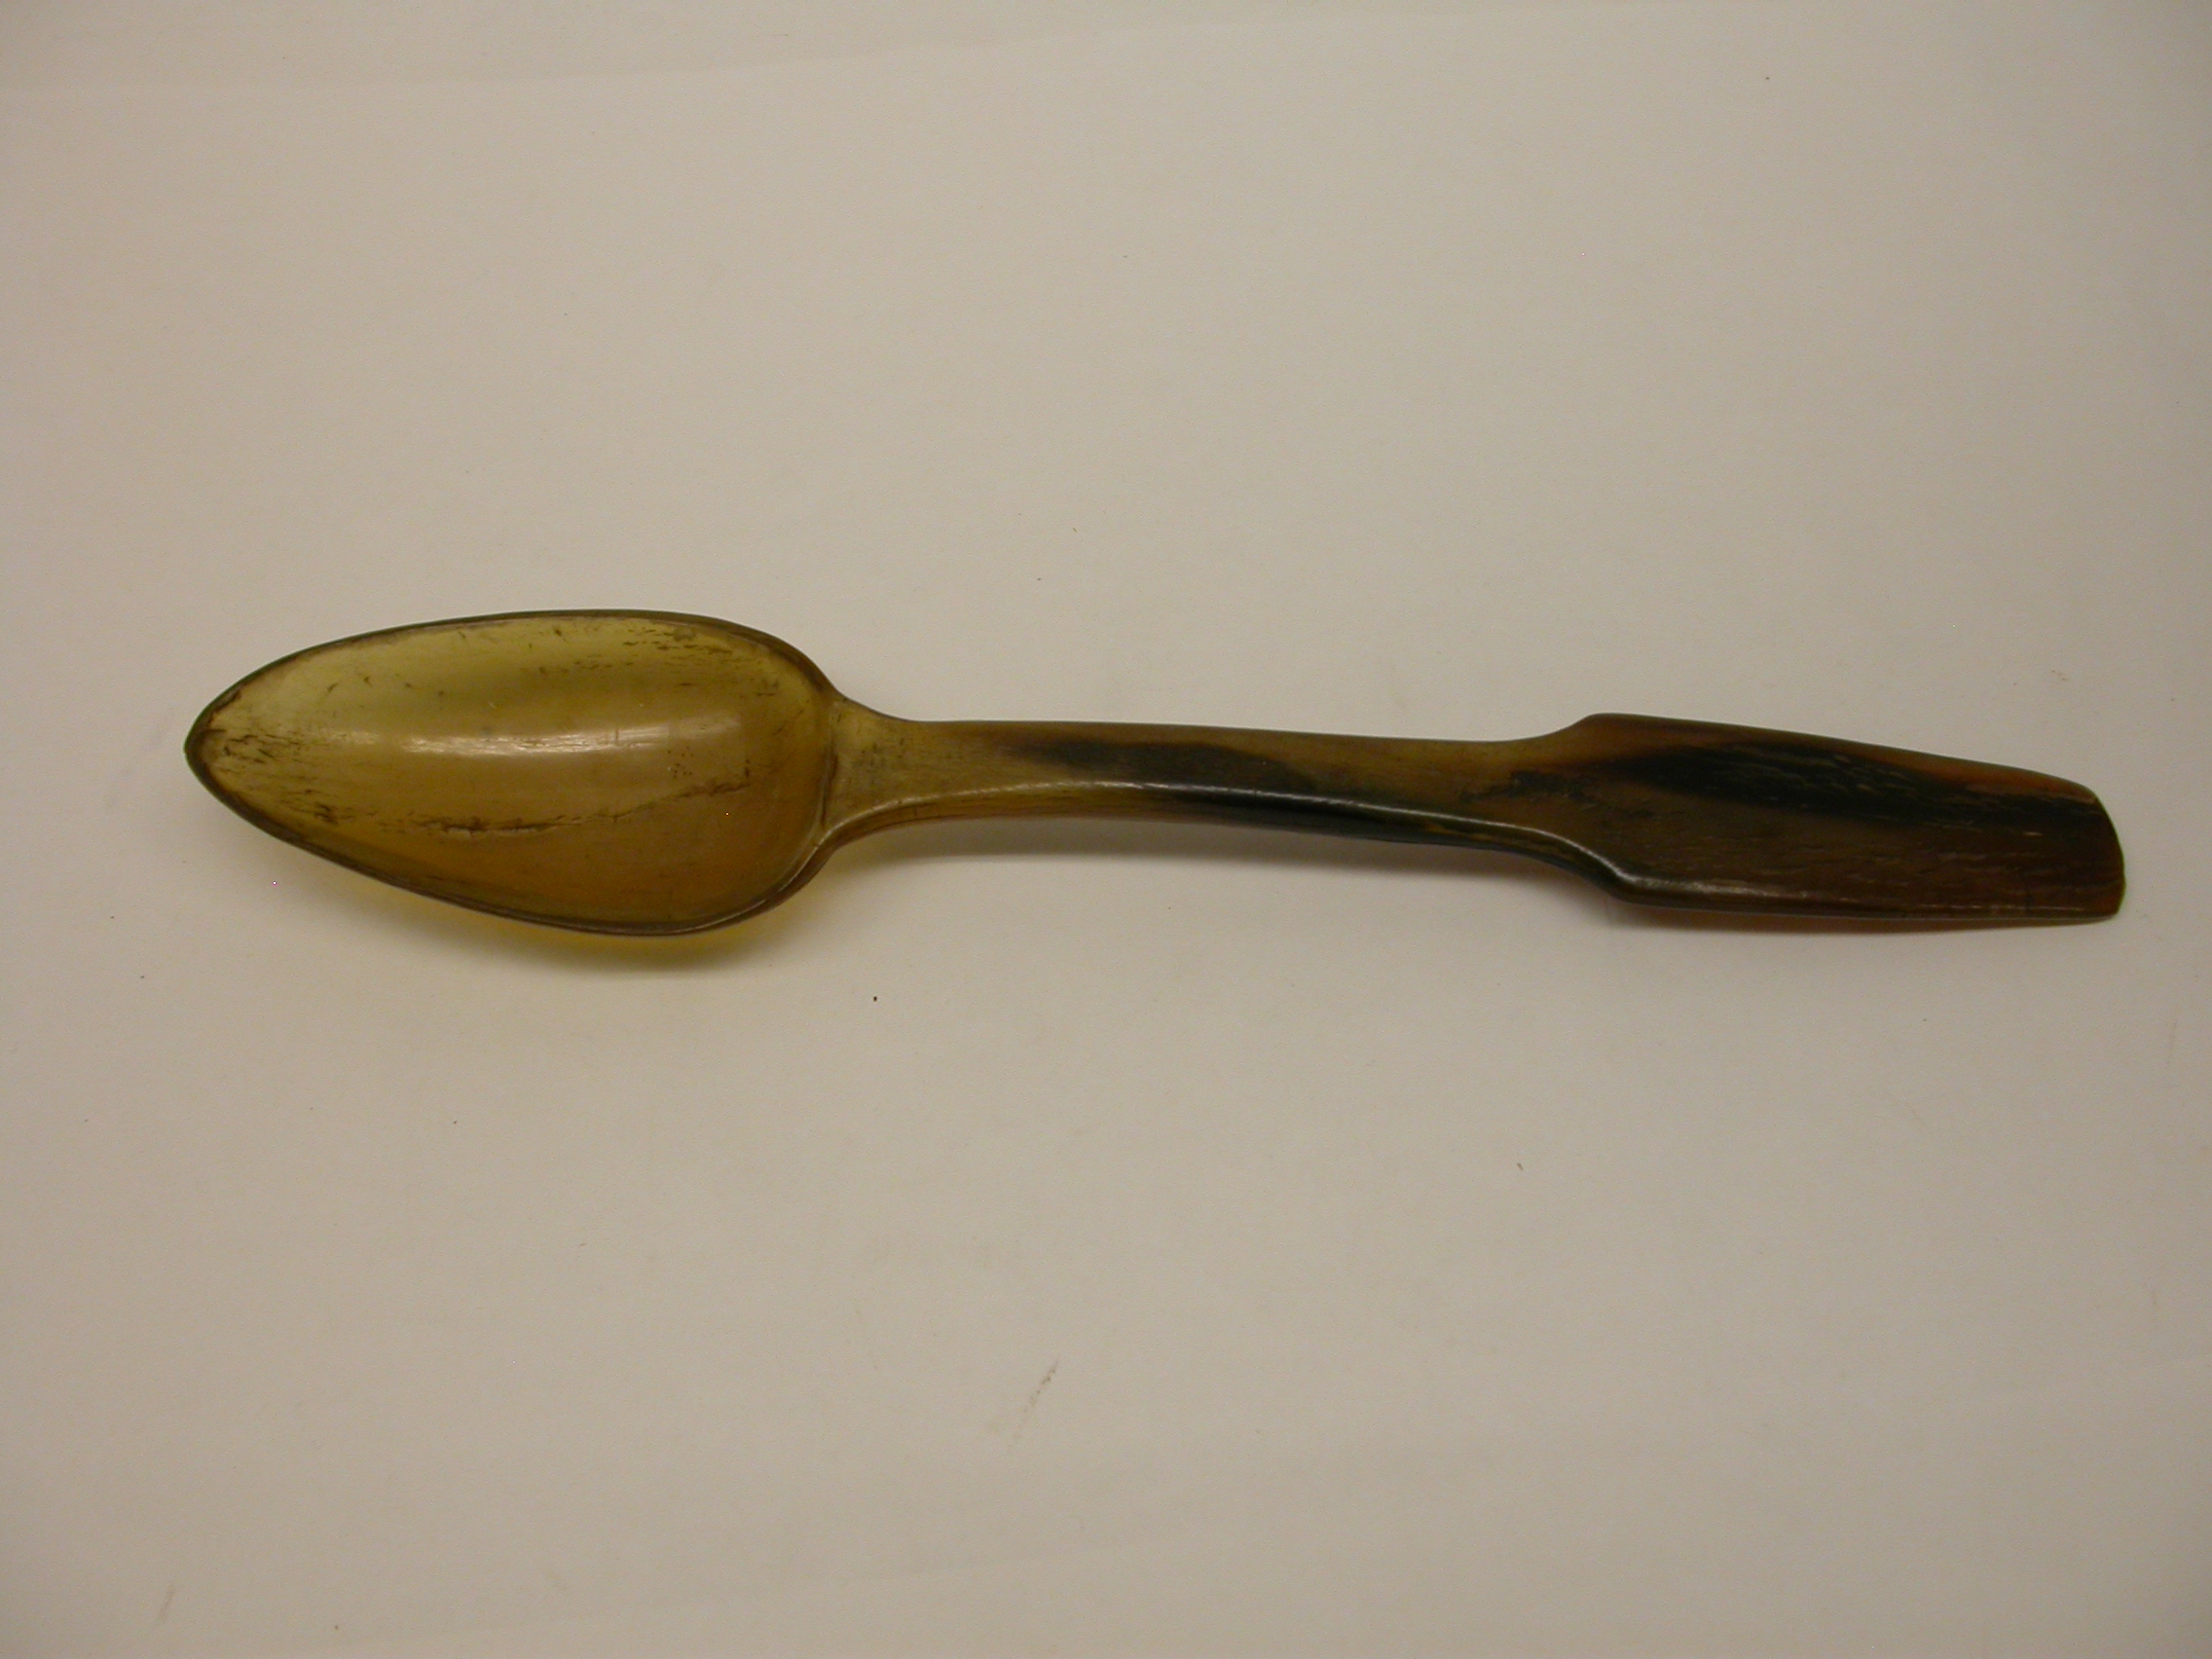 a%20spoon%20made%20out%20of%20horn%20wood